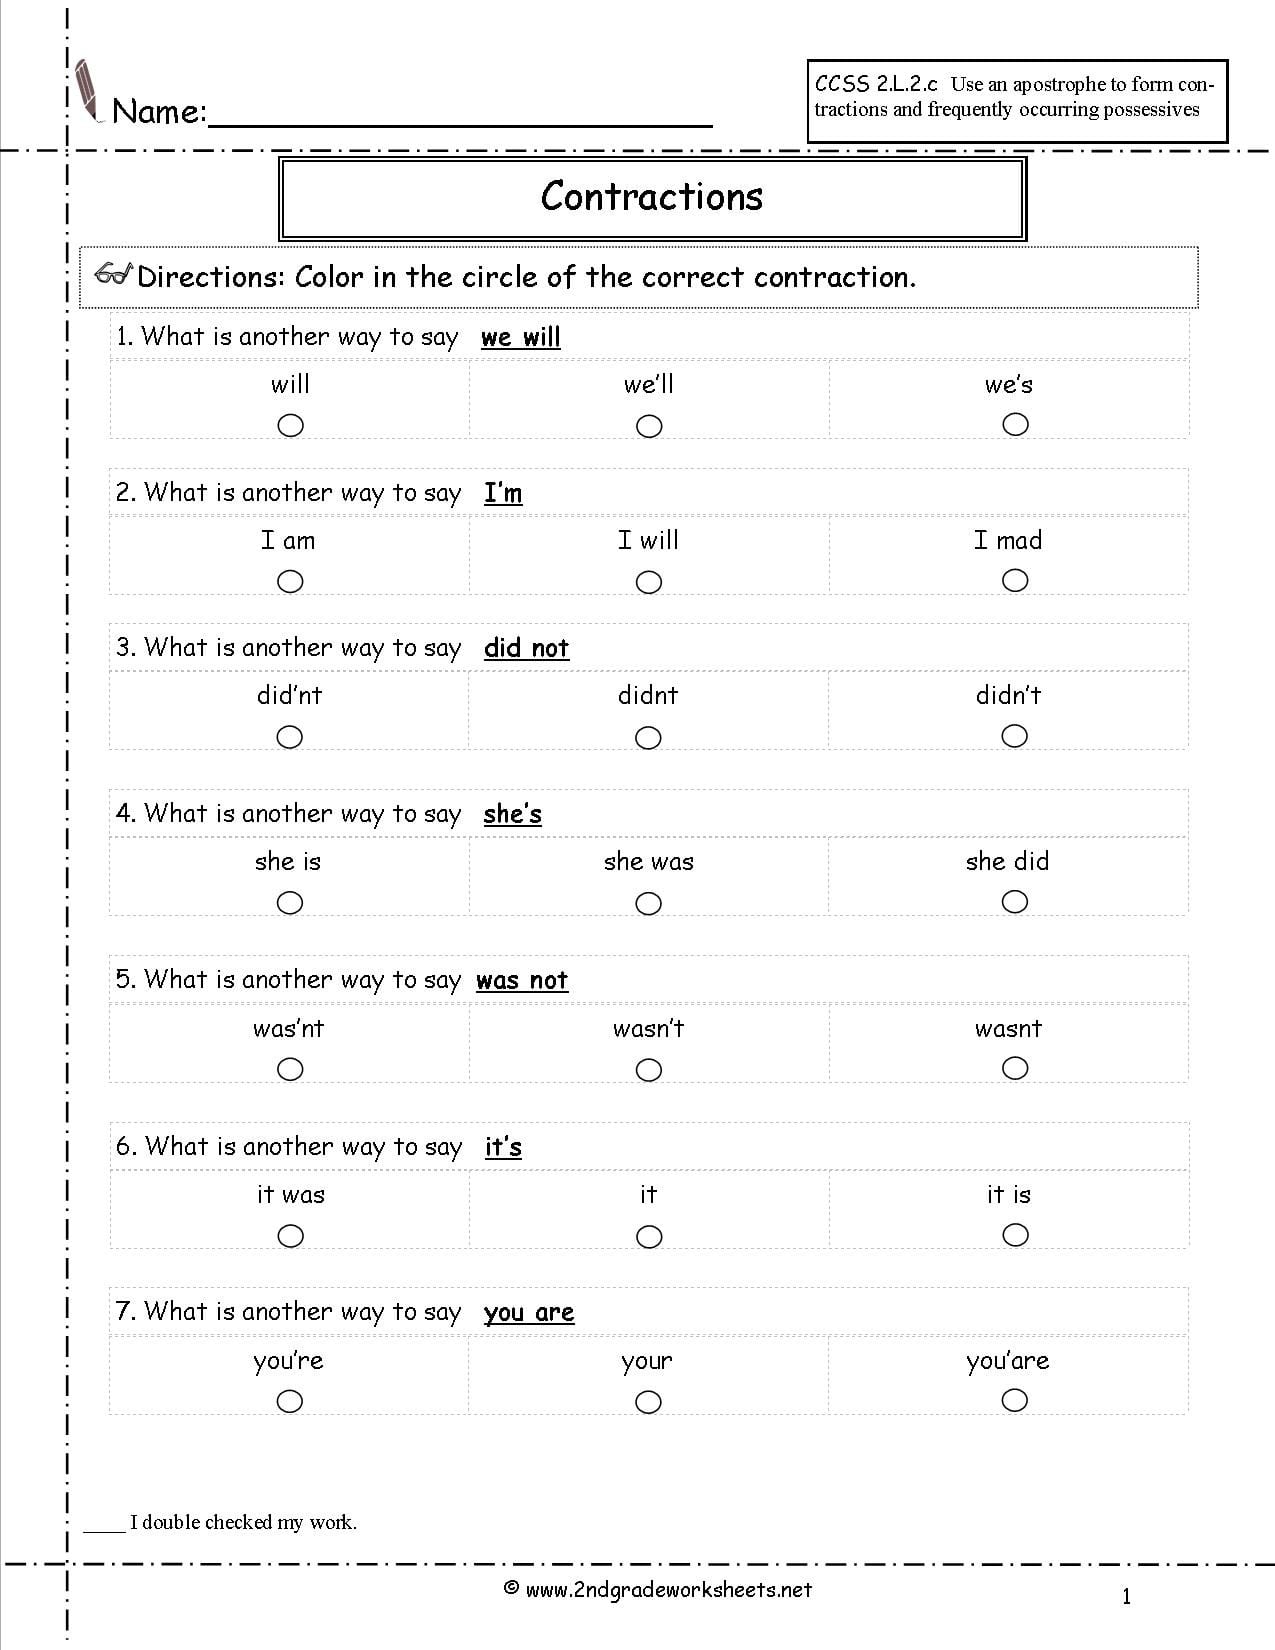 Free Contractions Worksheets And Printouts